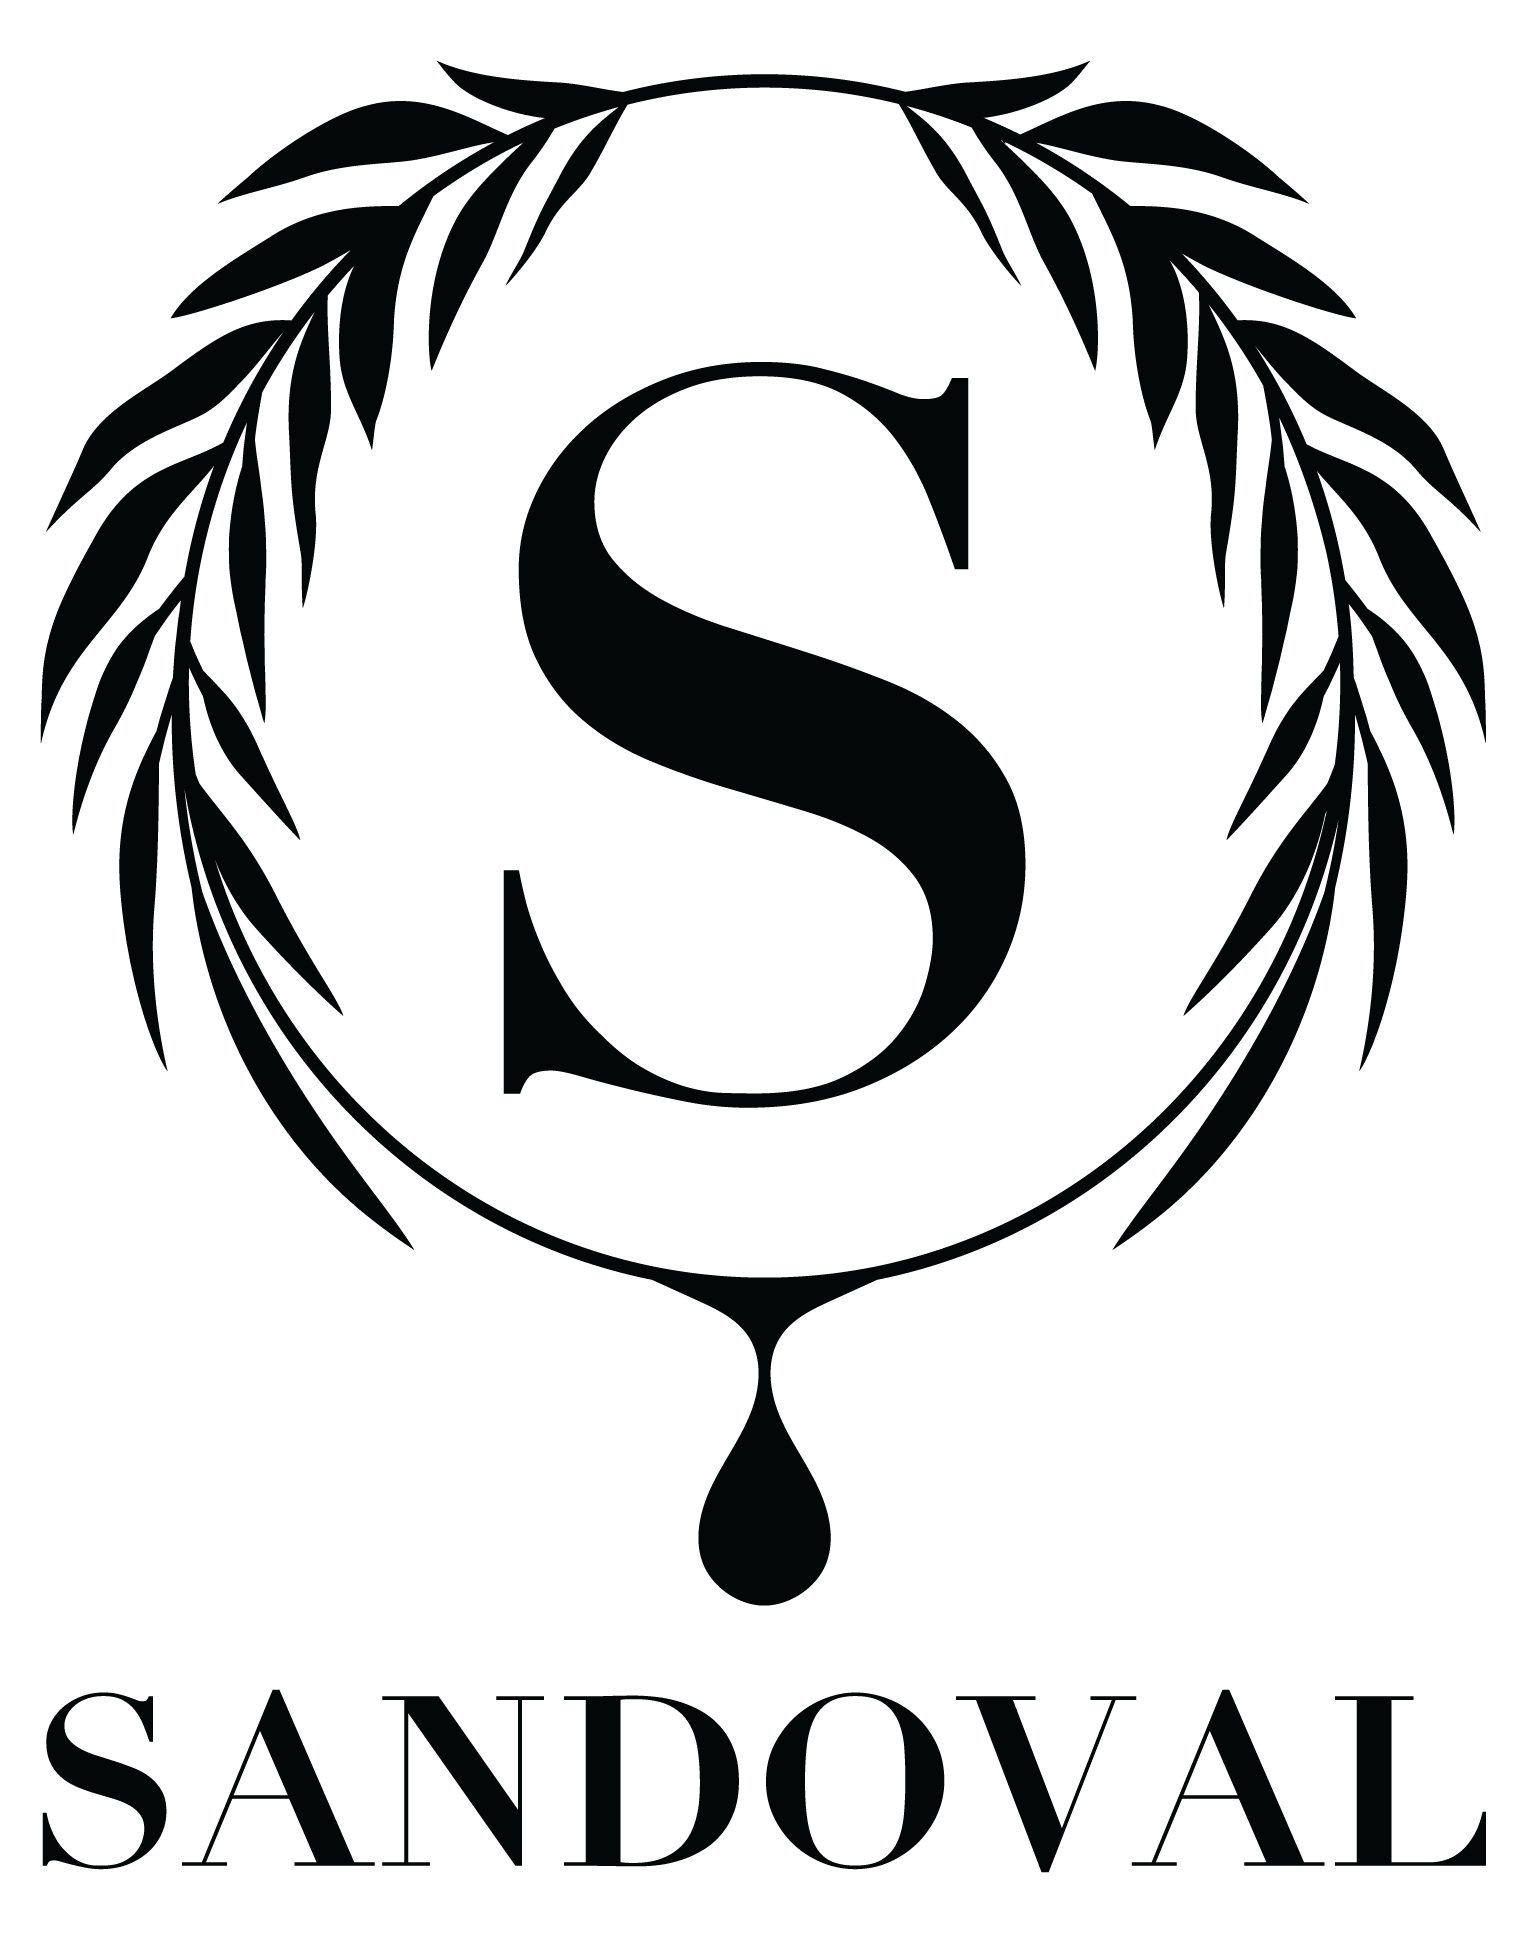 Sandoval Aromatic Fragrance Logo crest, for home , the body and the spirit